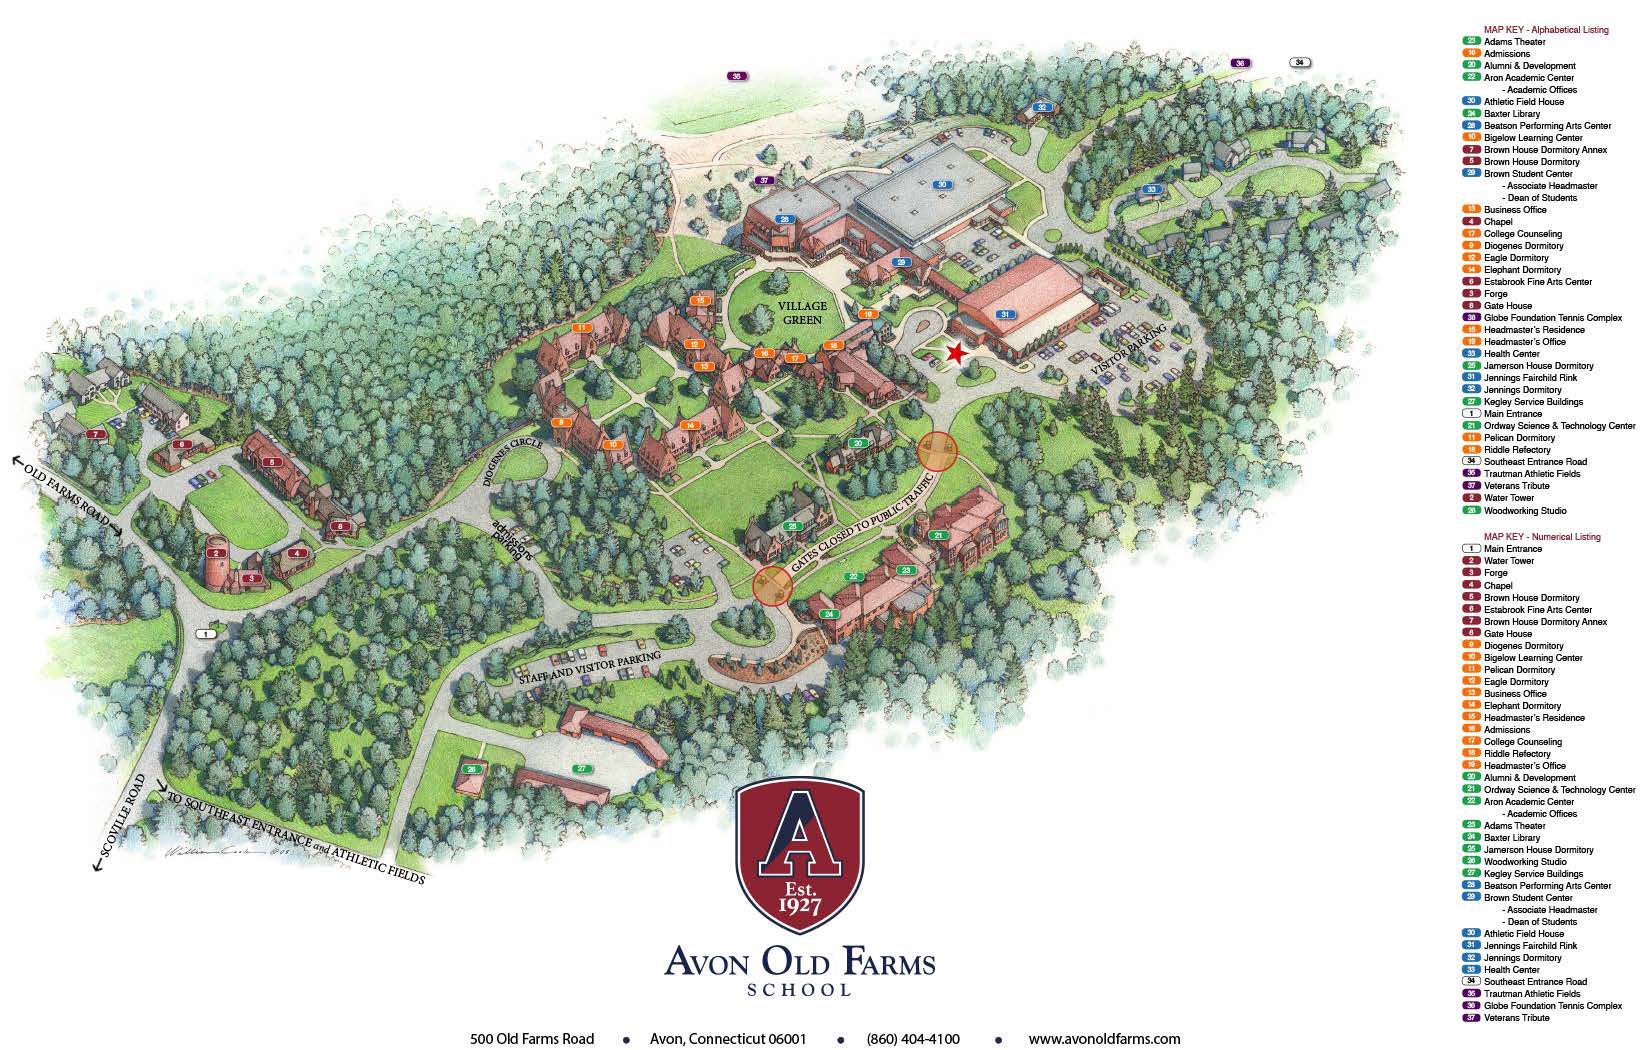 Image of the Avon Old Farms School campus map